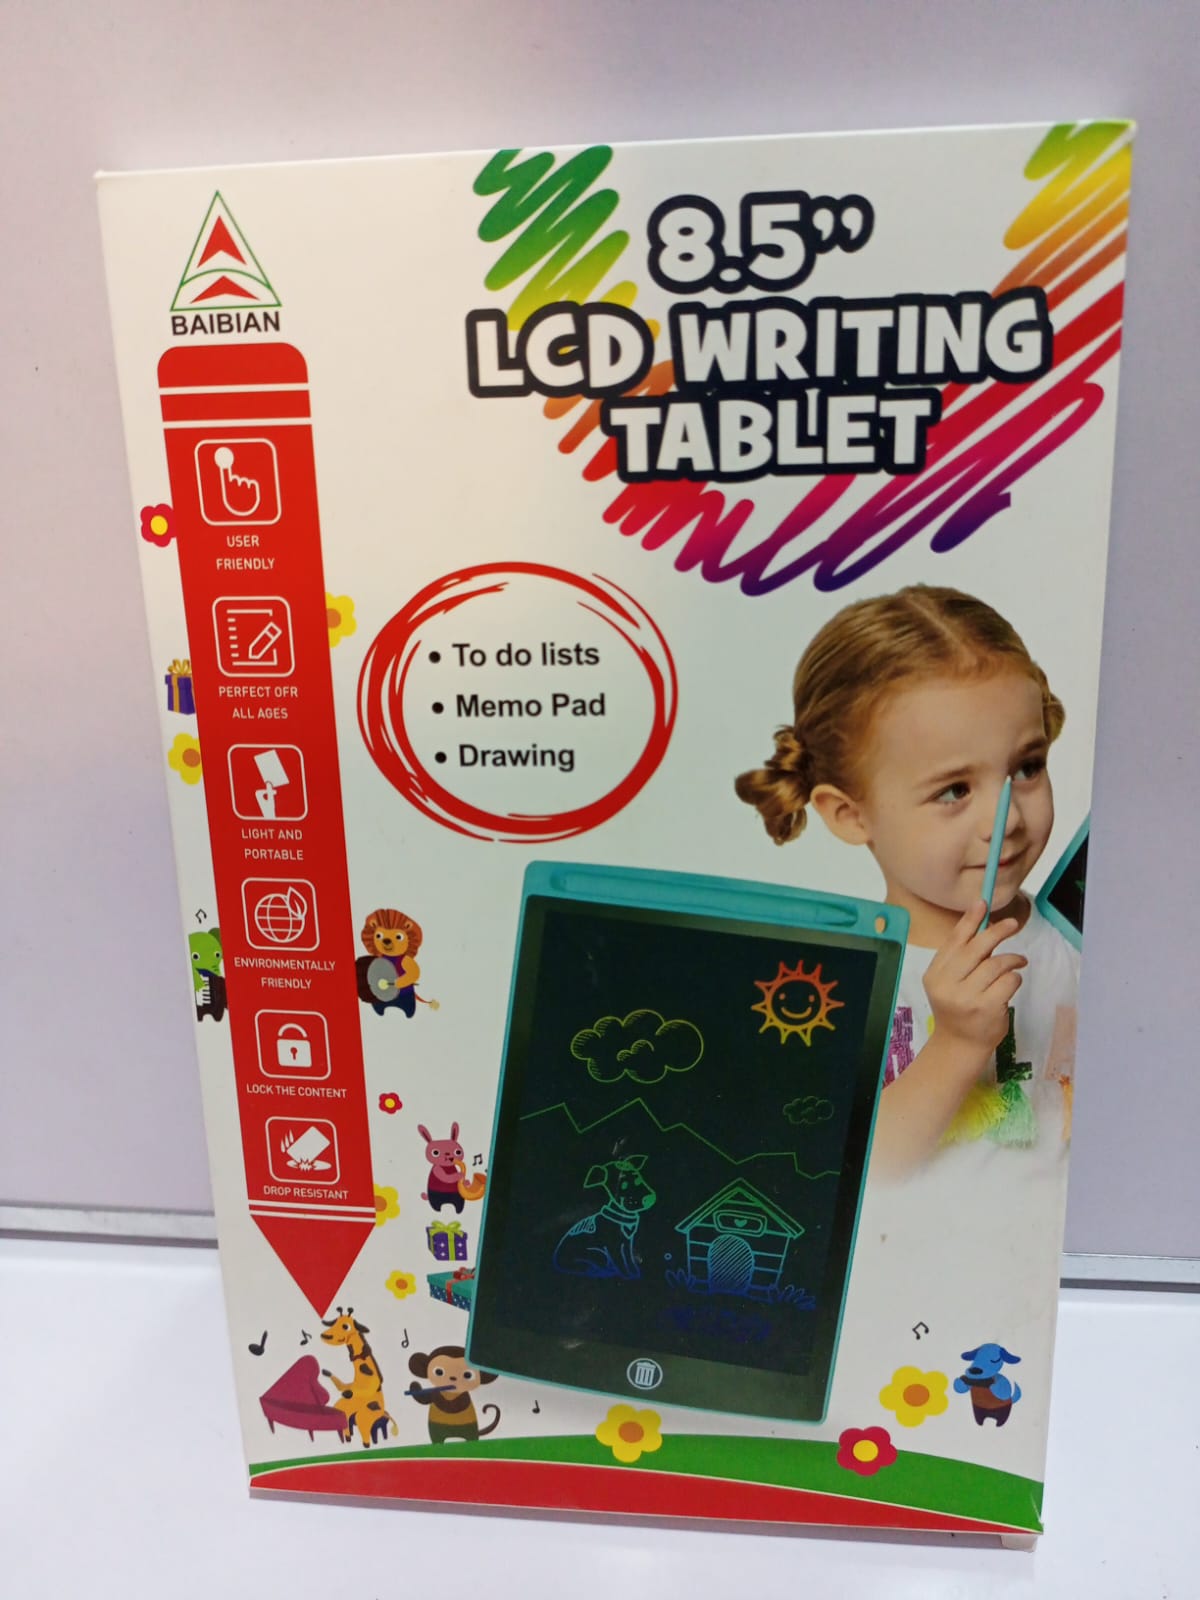 8.5" LCD Writing Tablet For Kids